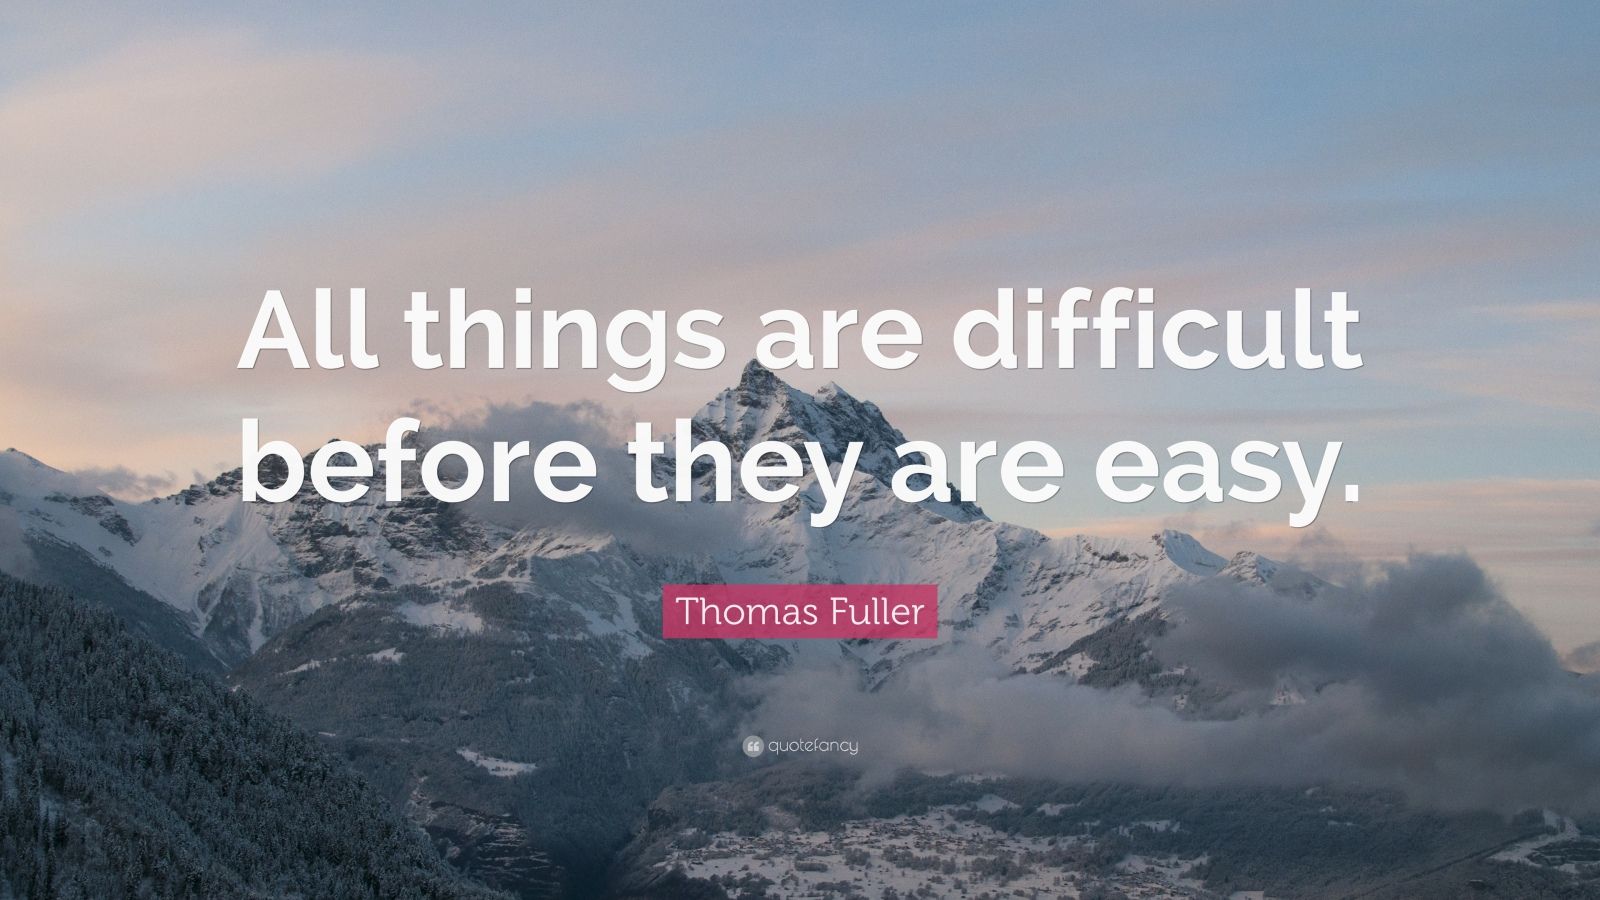 Thomas Fuller Quote: “All things are difficult before they are easy ...